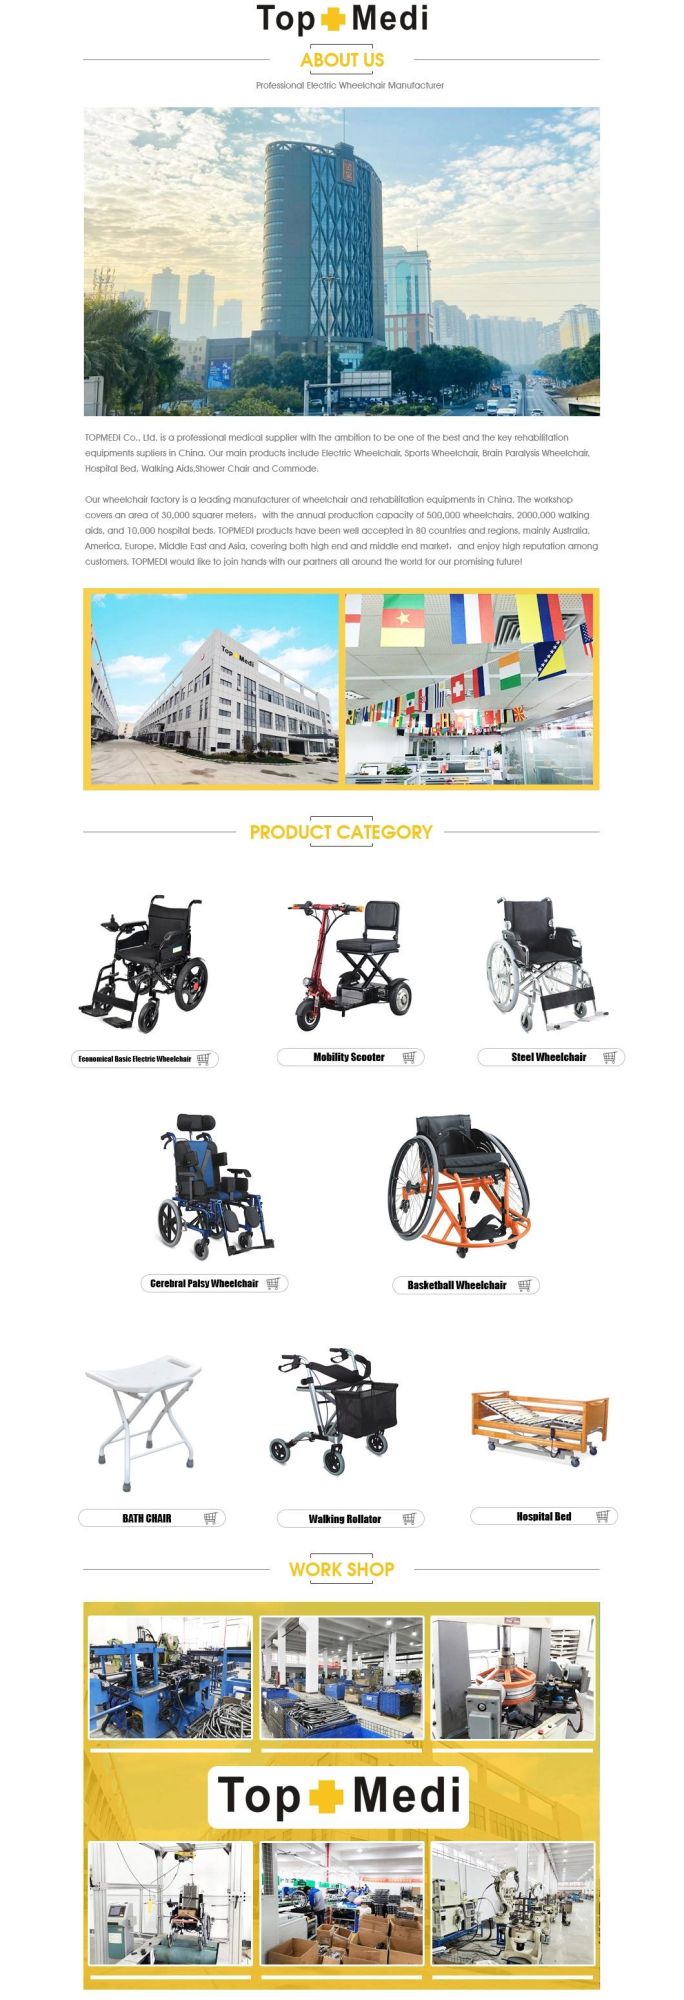 67cm Overall Width High Back Orthopedic Manual Wheelchair with Reclining Backrest